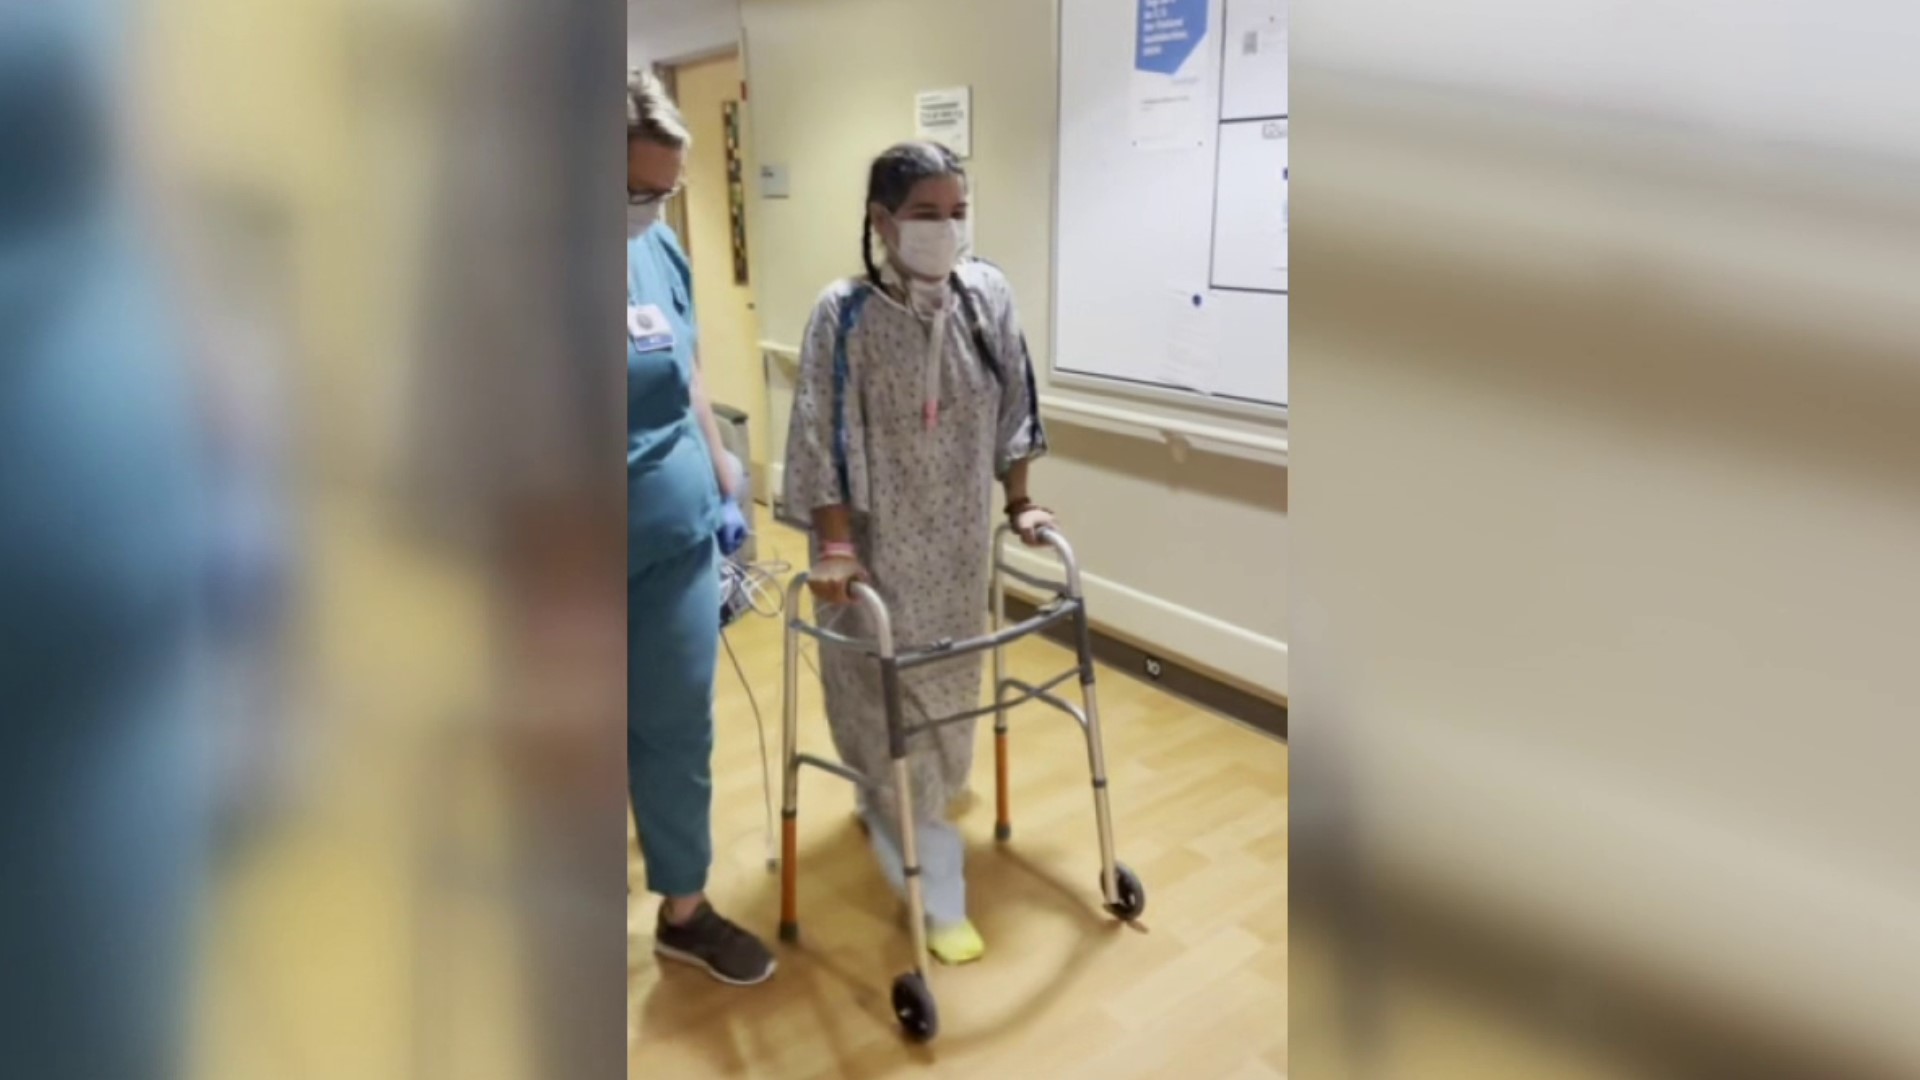 A young woman from Northumberland County feels lucky to be alive after being hospitalized with Covid-19 for nearly three months.